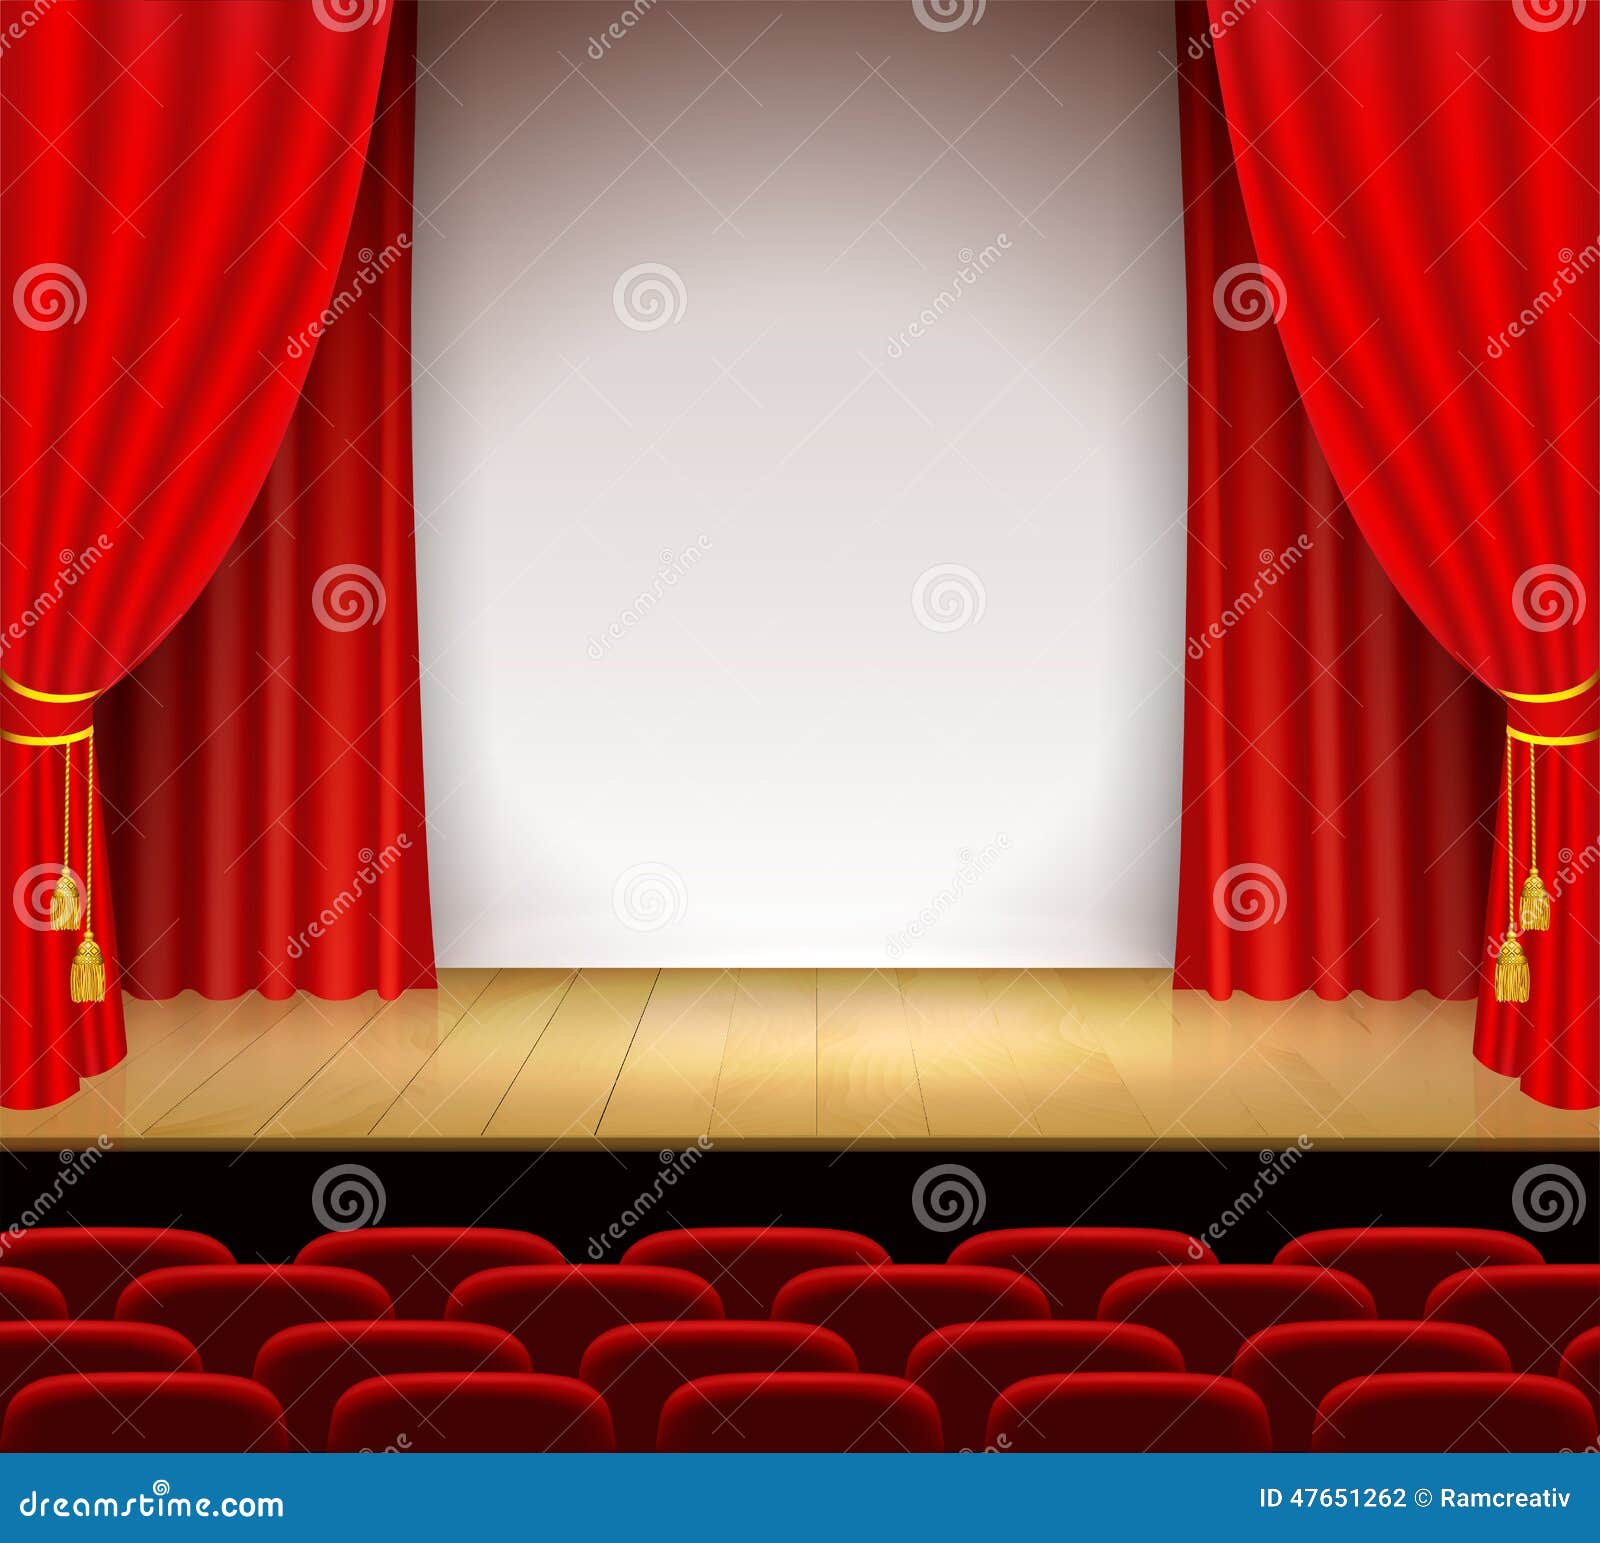 Theatrical scene with white a stand and red curtain. Illustration